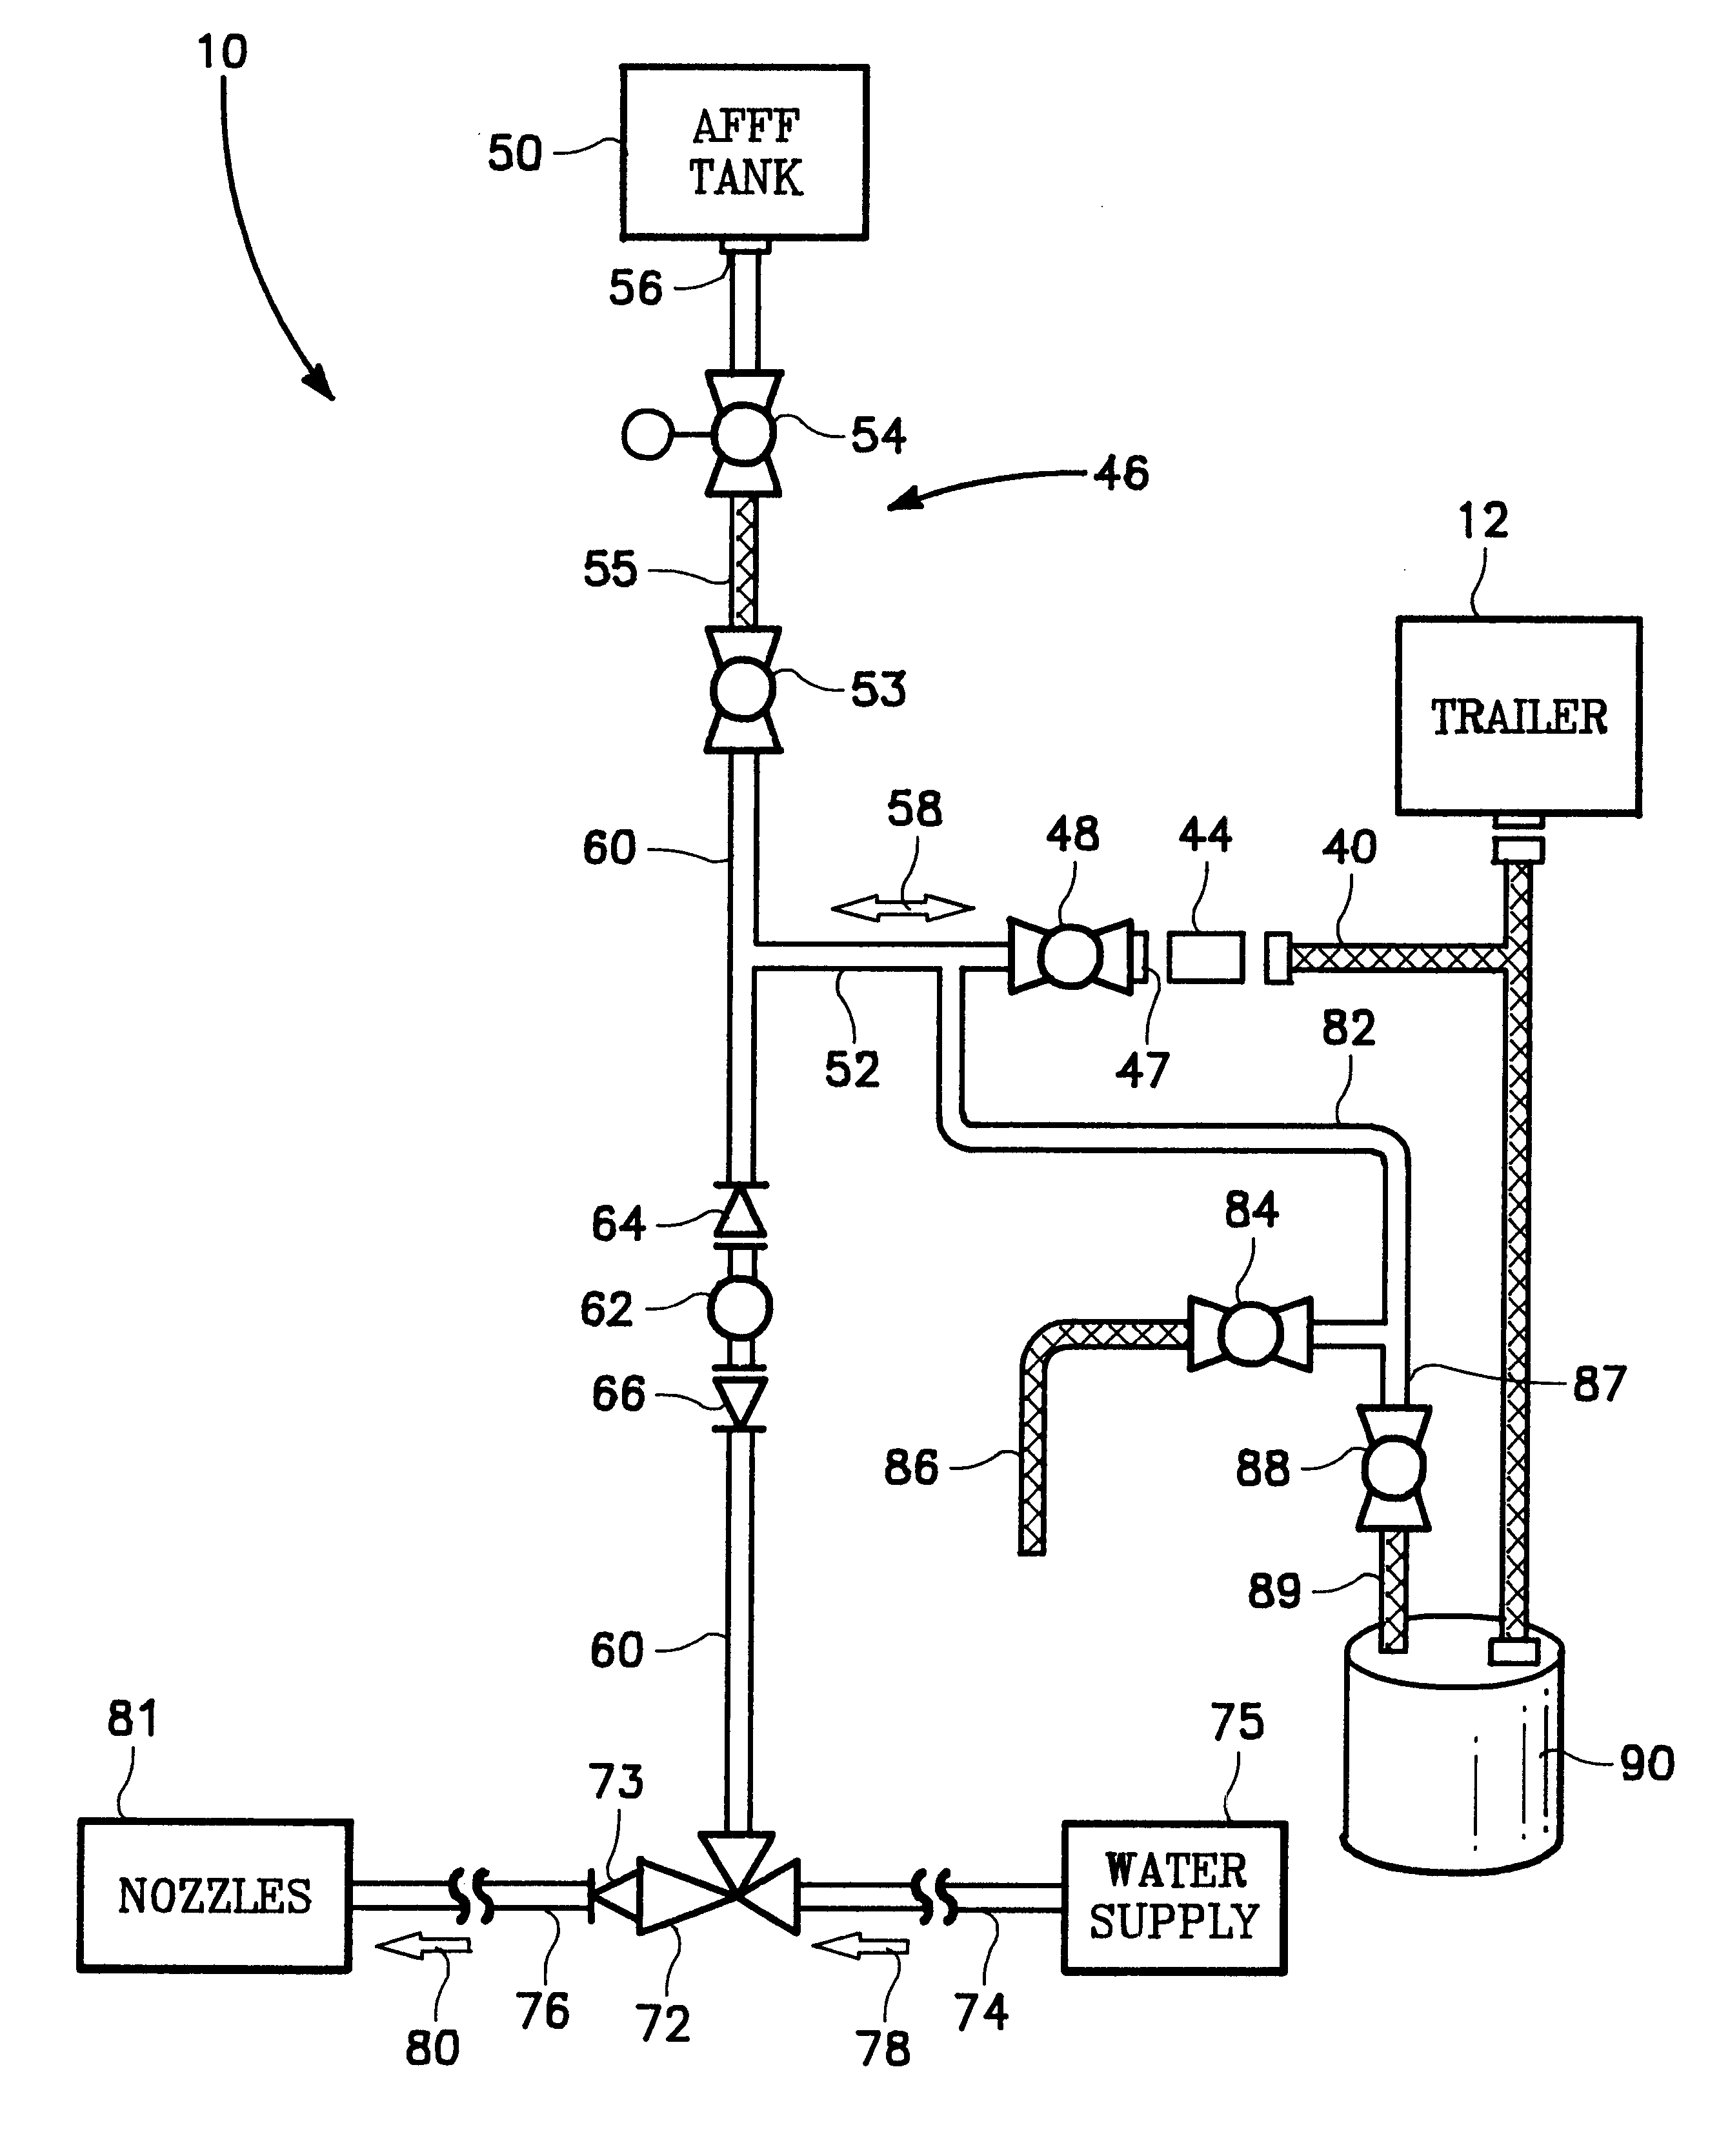 NoFoam system for testing a foam delivery system on a vehicle